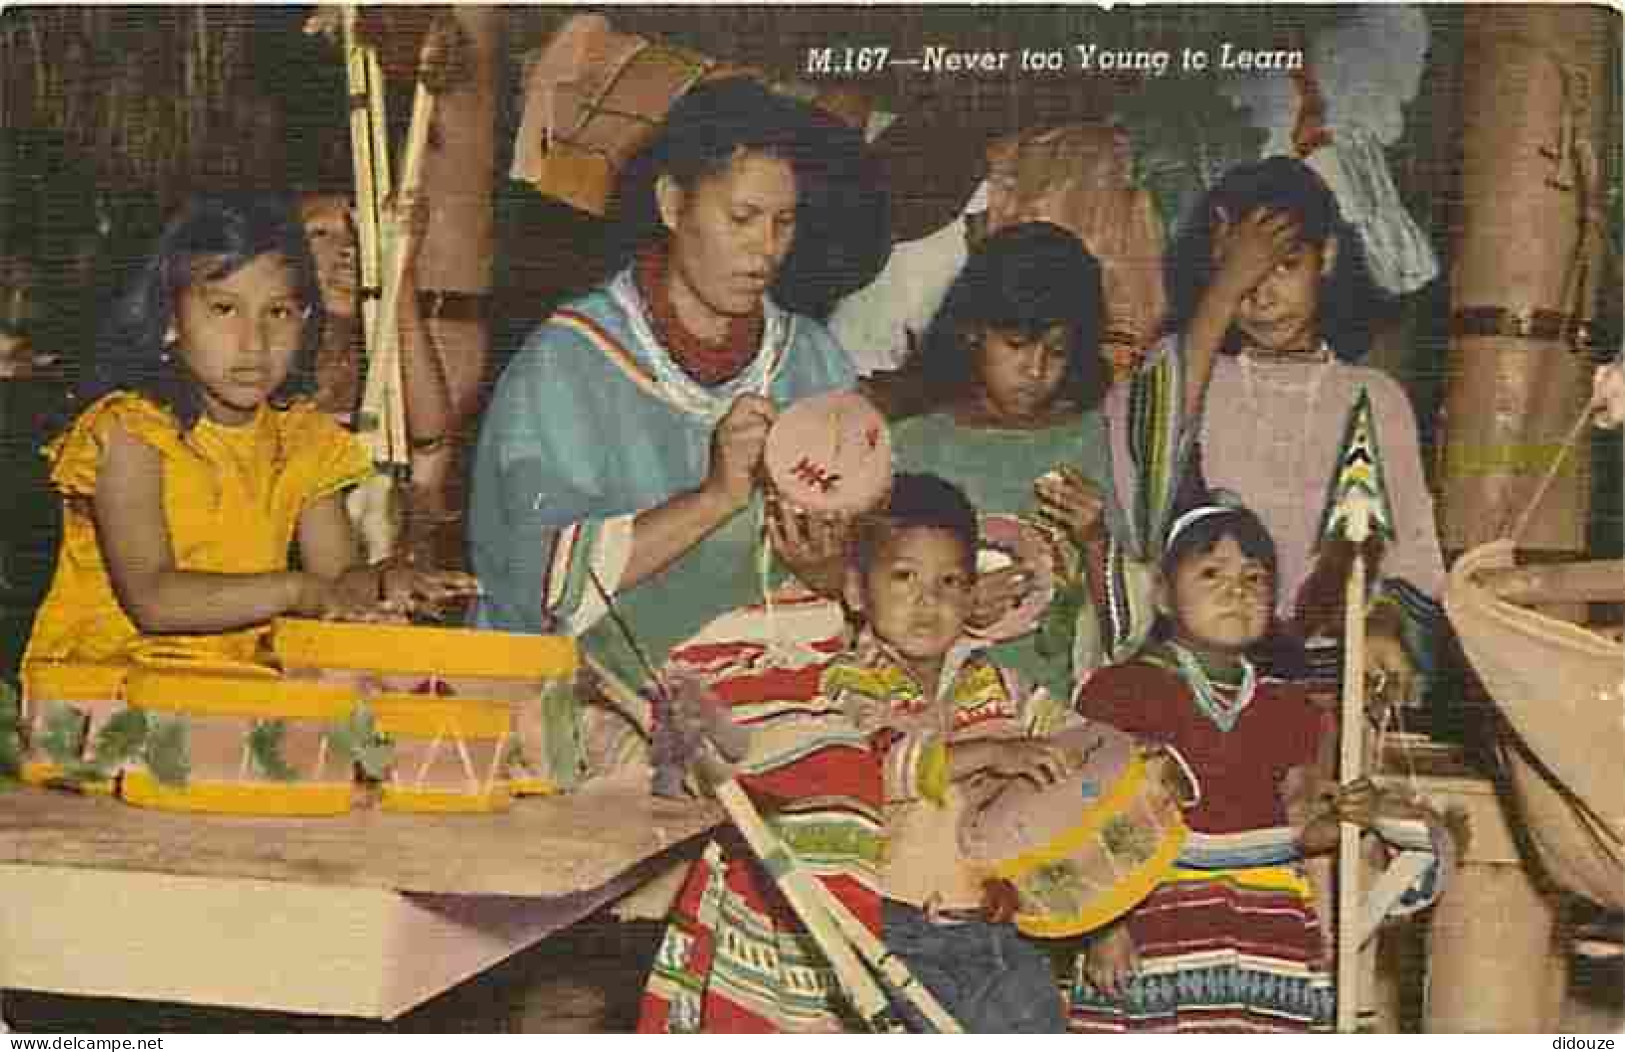 Etats Unis - Miami - Mary Osceola Teaches A Class Of Youngsters At Miami's Famous Seminole - Indian Village - Never Too  - Miami